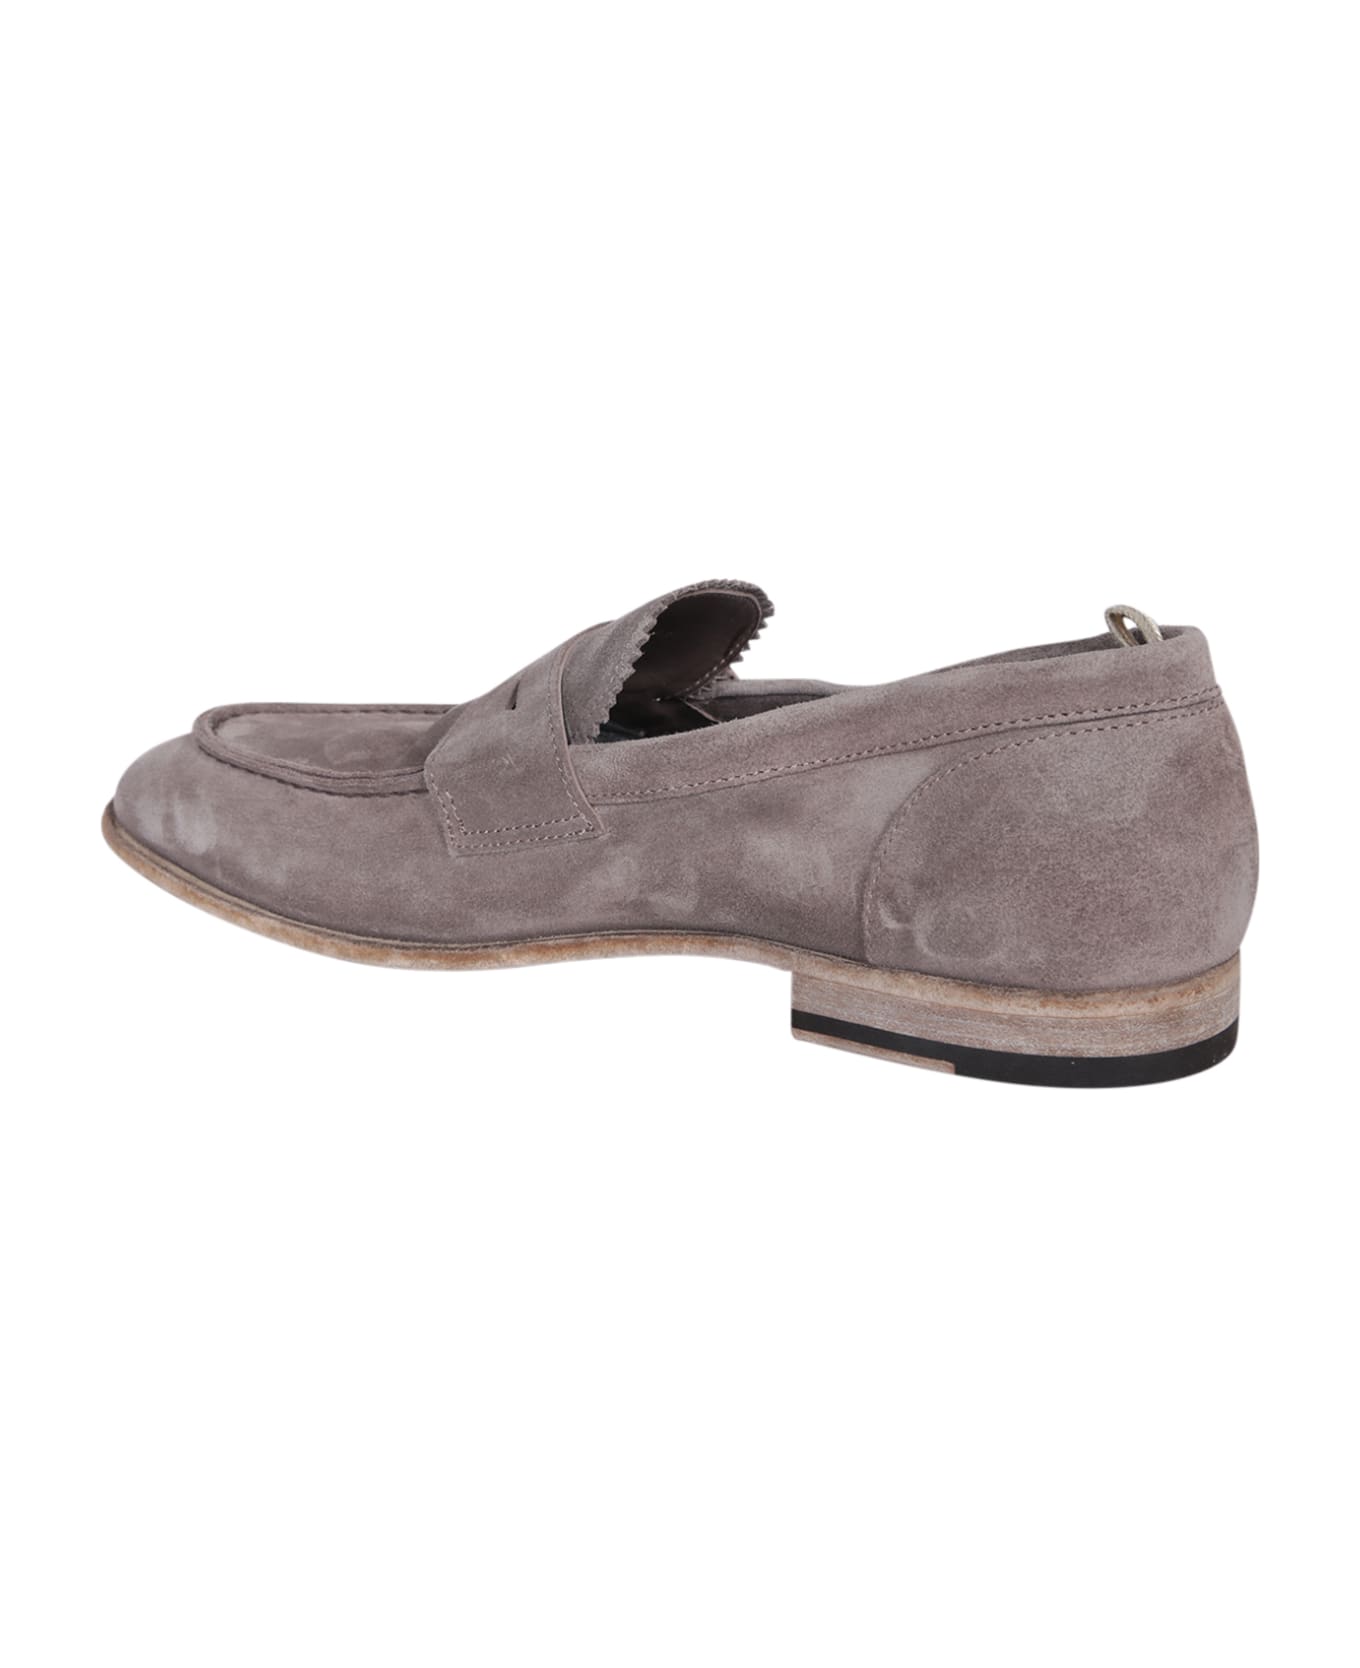 Officine Creative Solitude 001 Suede Taupe Loafer - Grey ローファー＆デッキシューズ